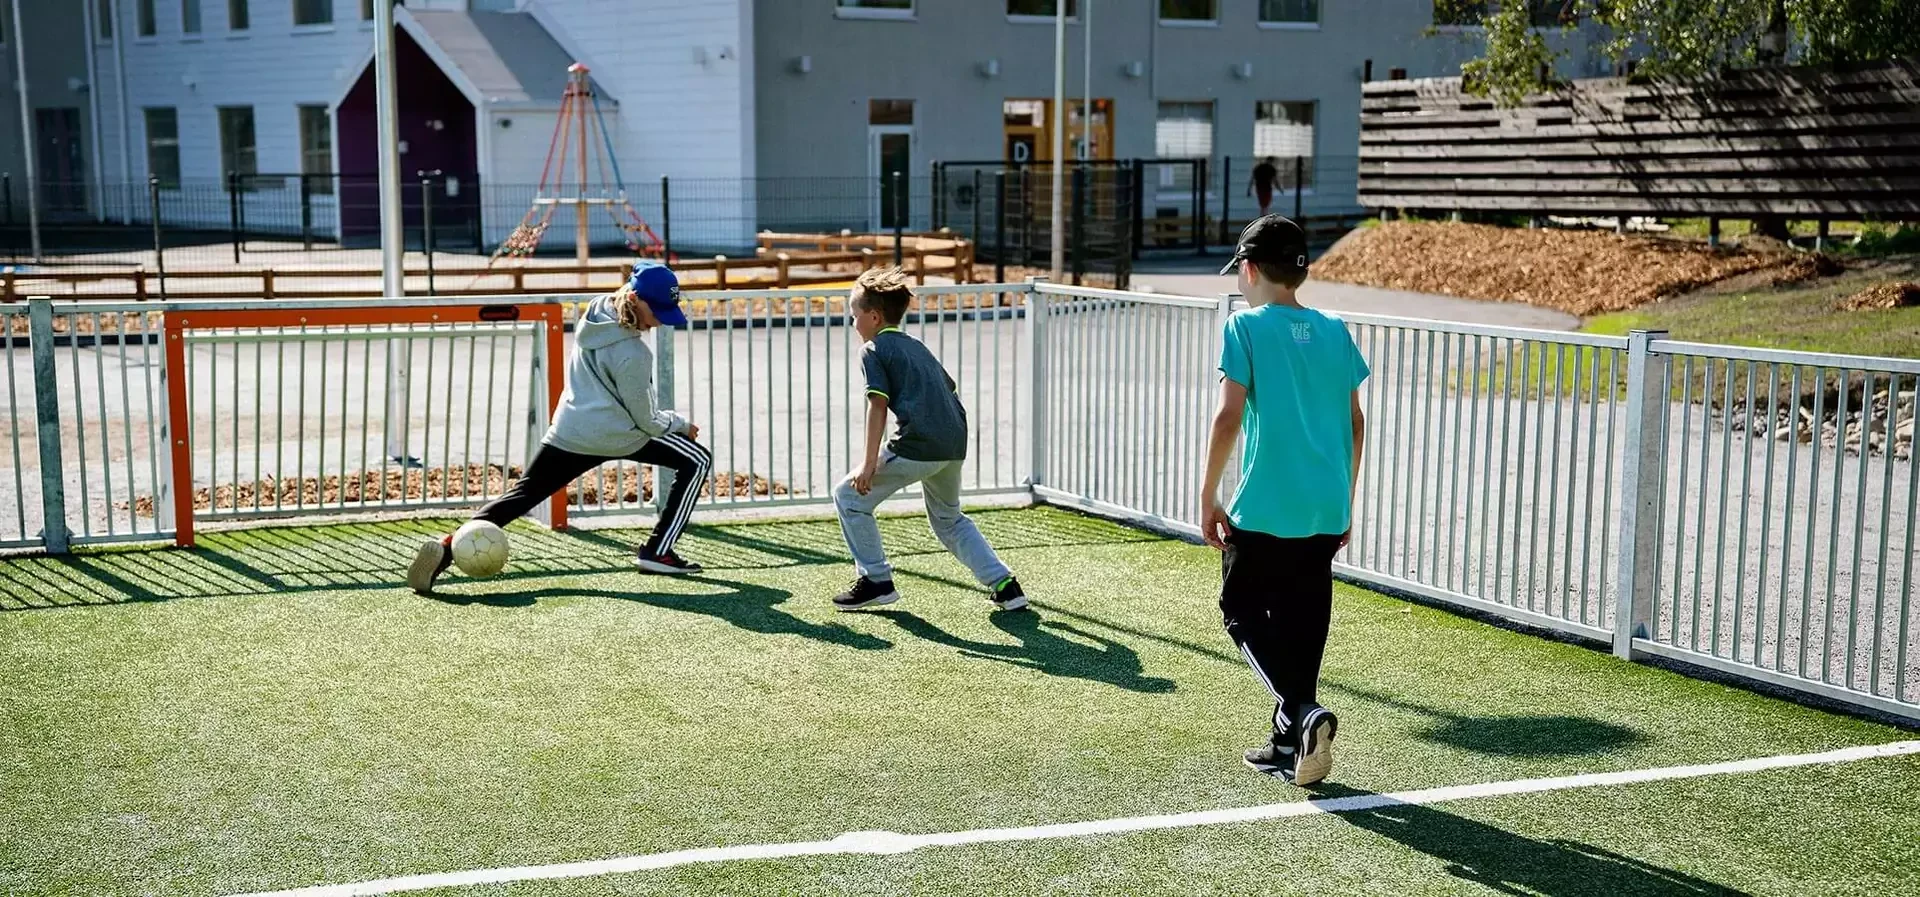 Kids playing soccer in an outdoor multisport arena